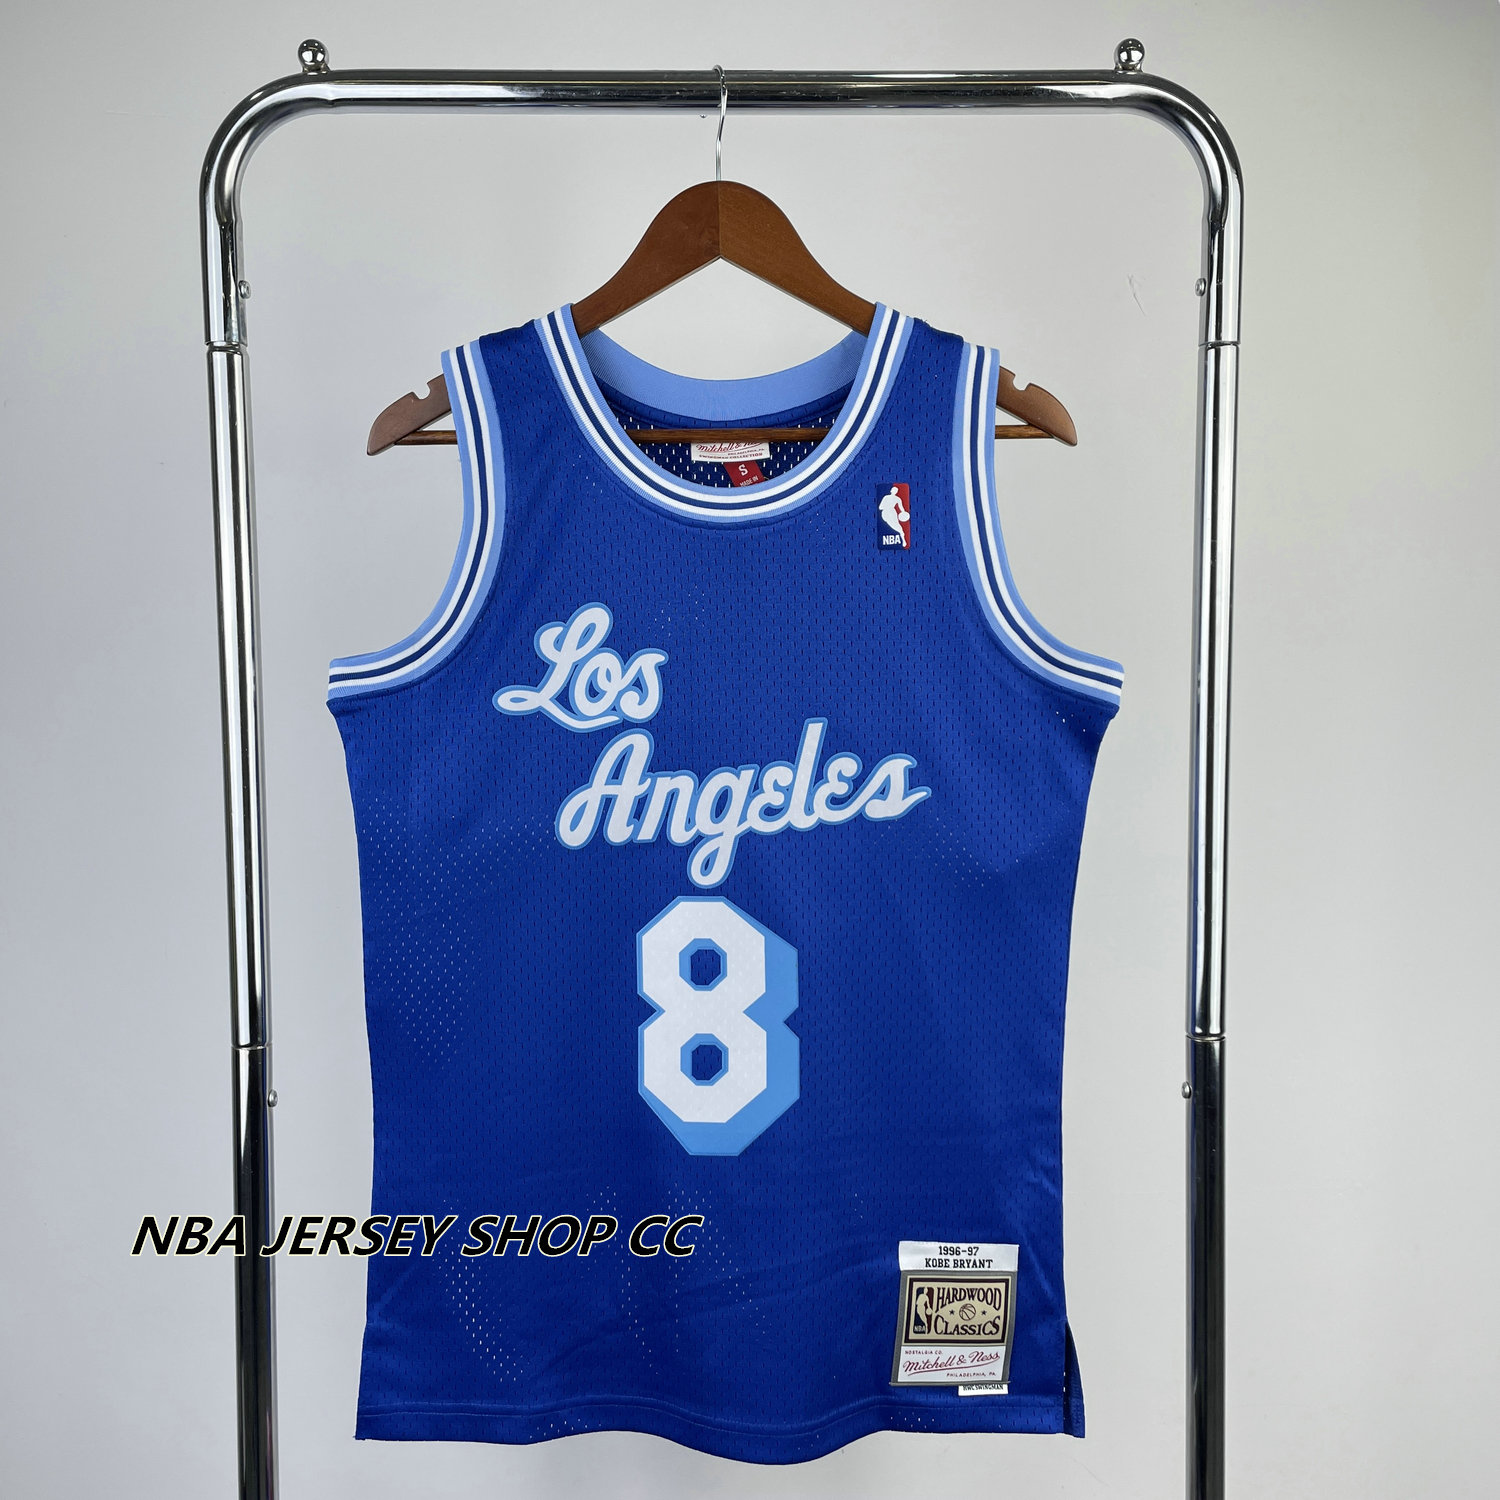 Kobe Bryant #8 Los Angeles Lakers Classic Throwback Jersey (Blue on Blue)